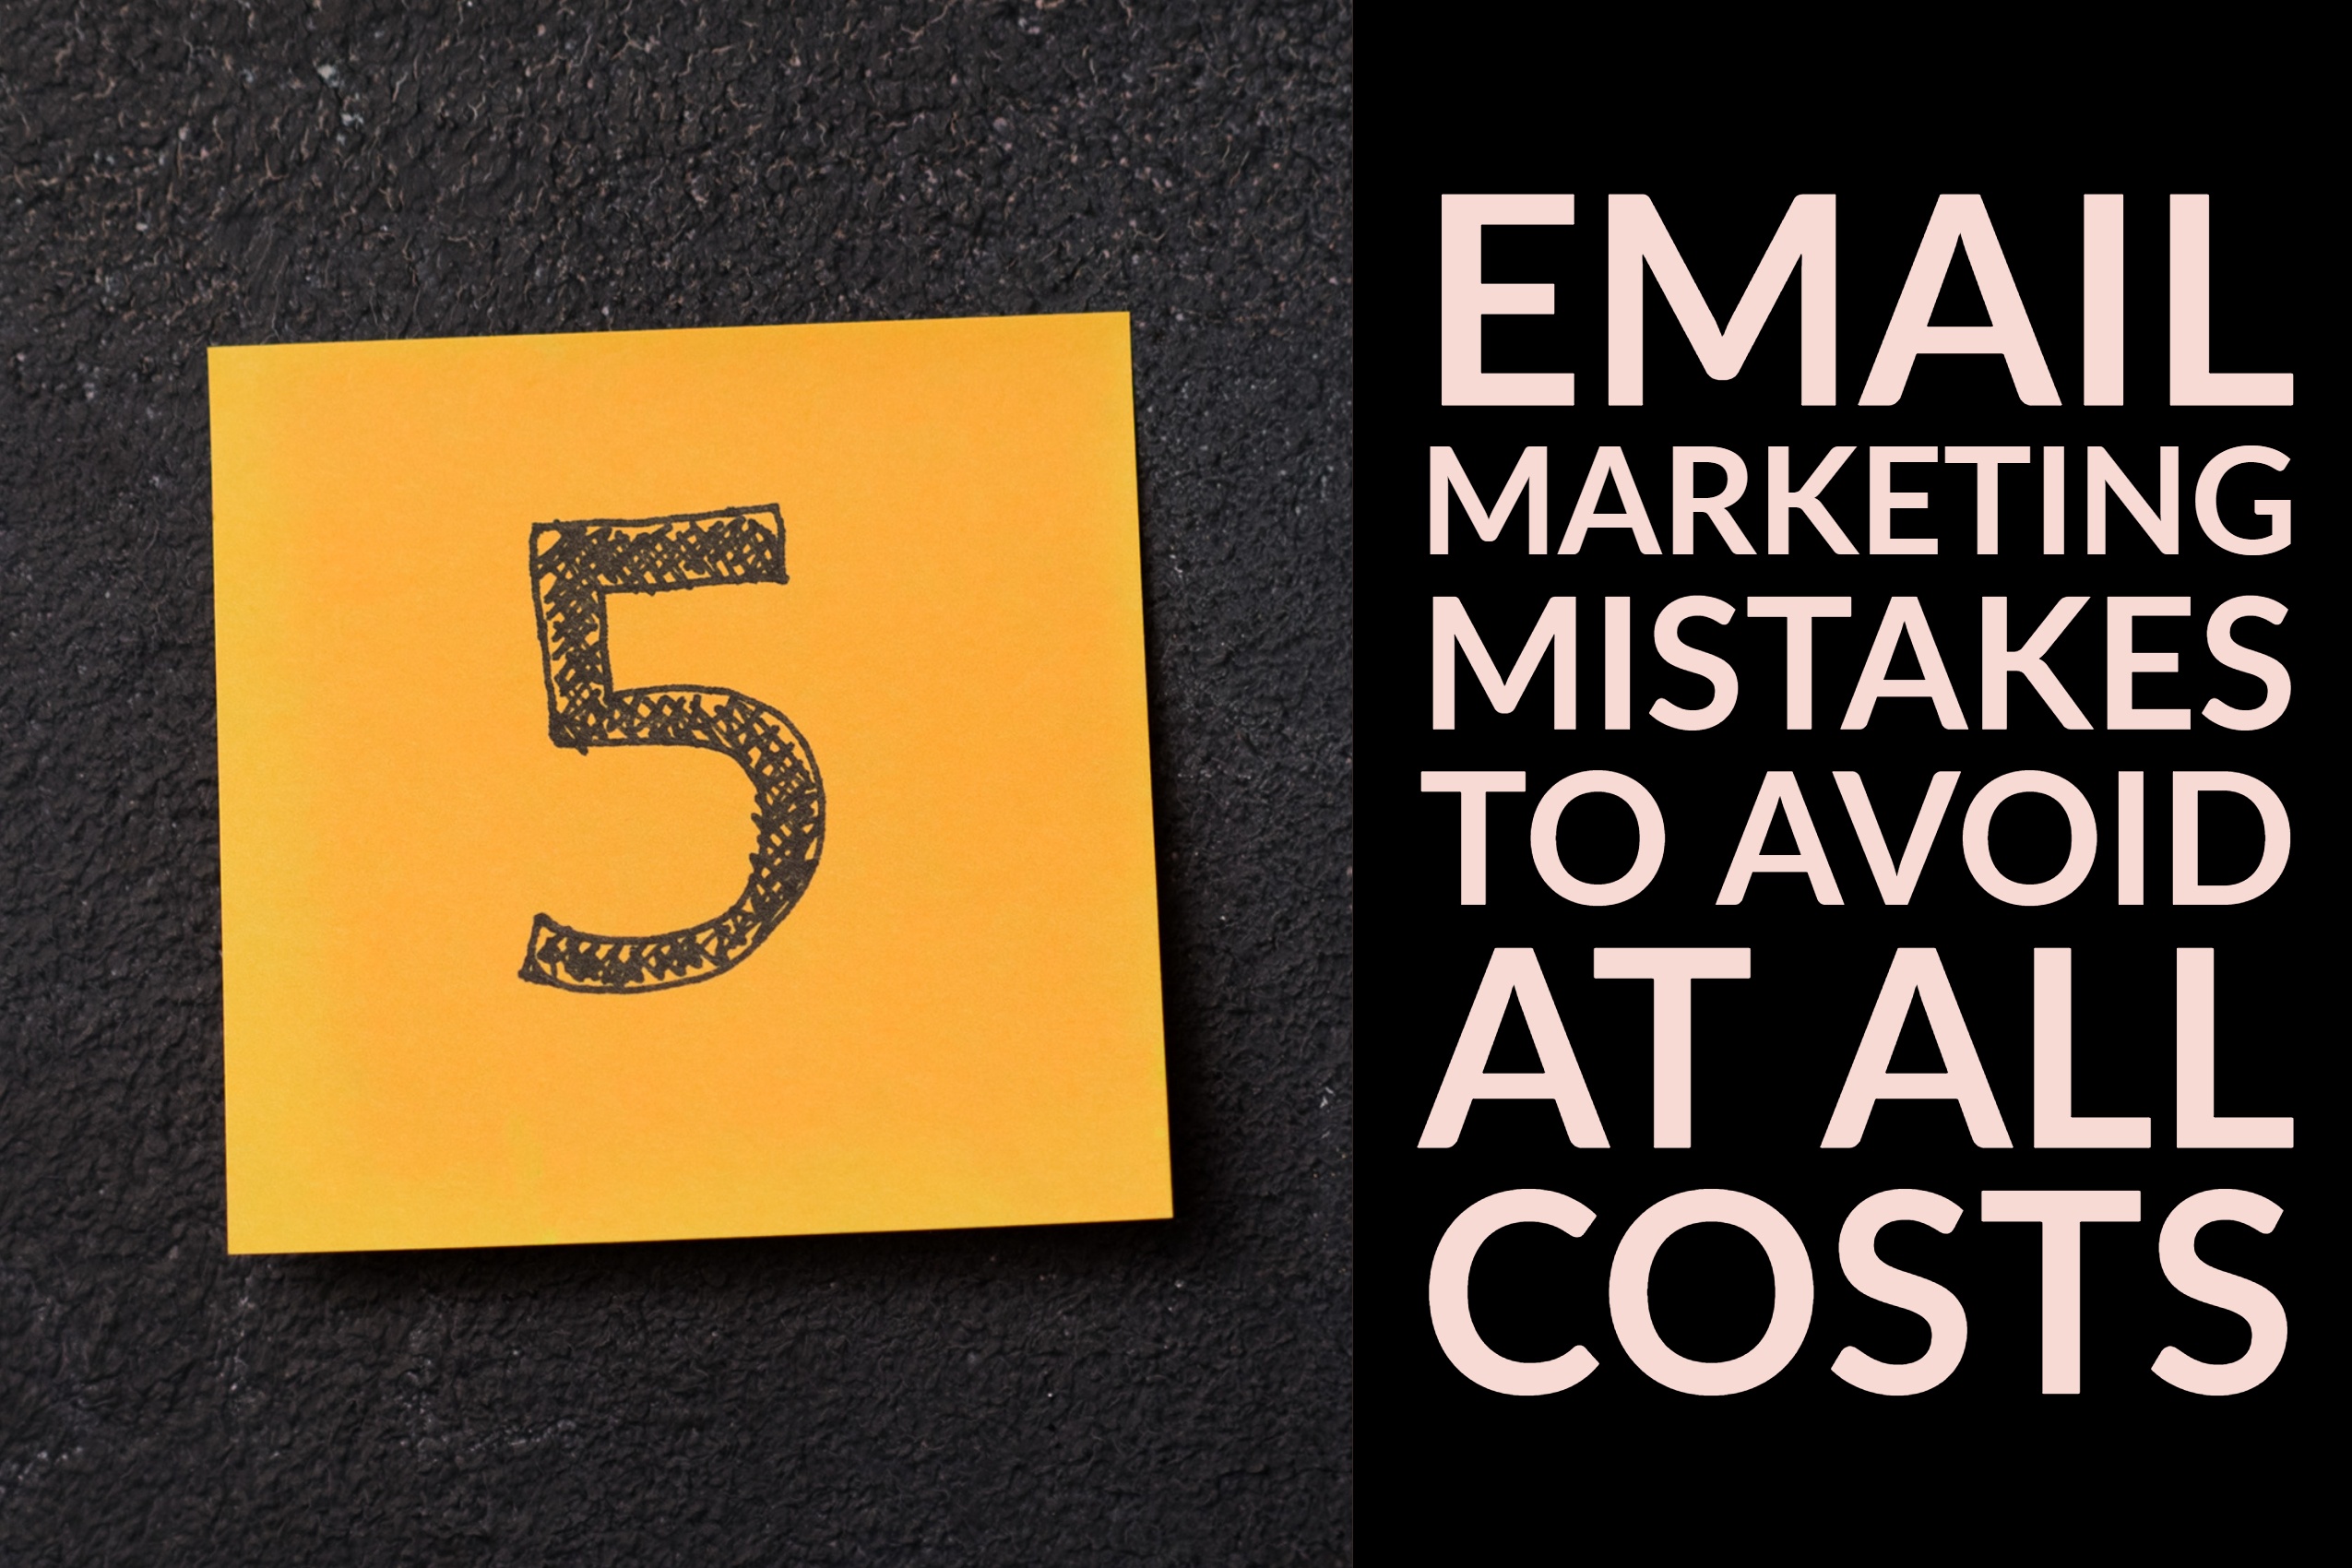 5 Email Marketing Mistakes to Avoid At All Costs